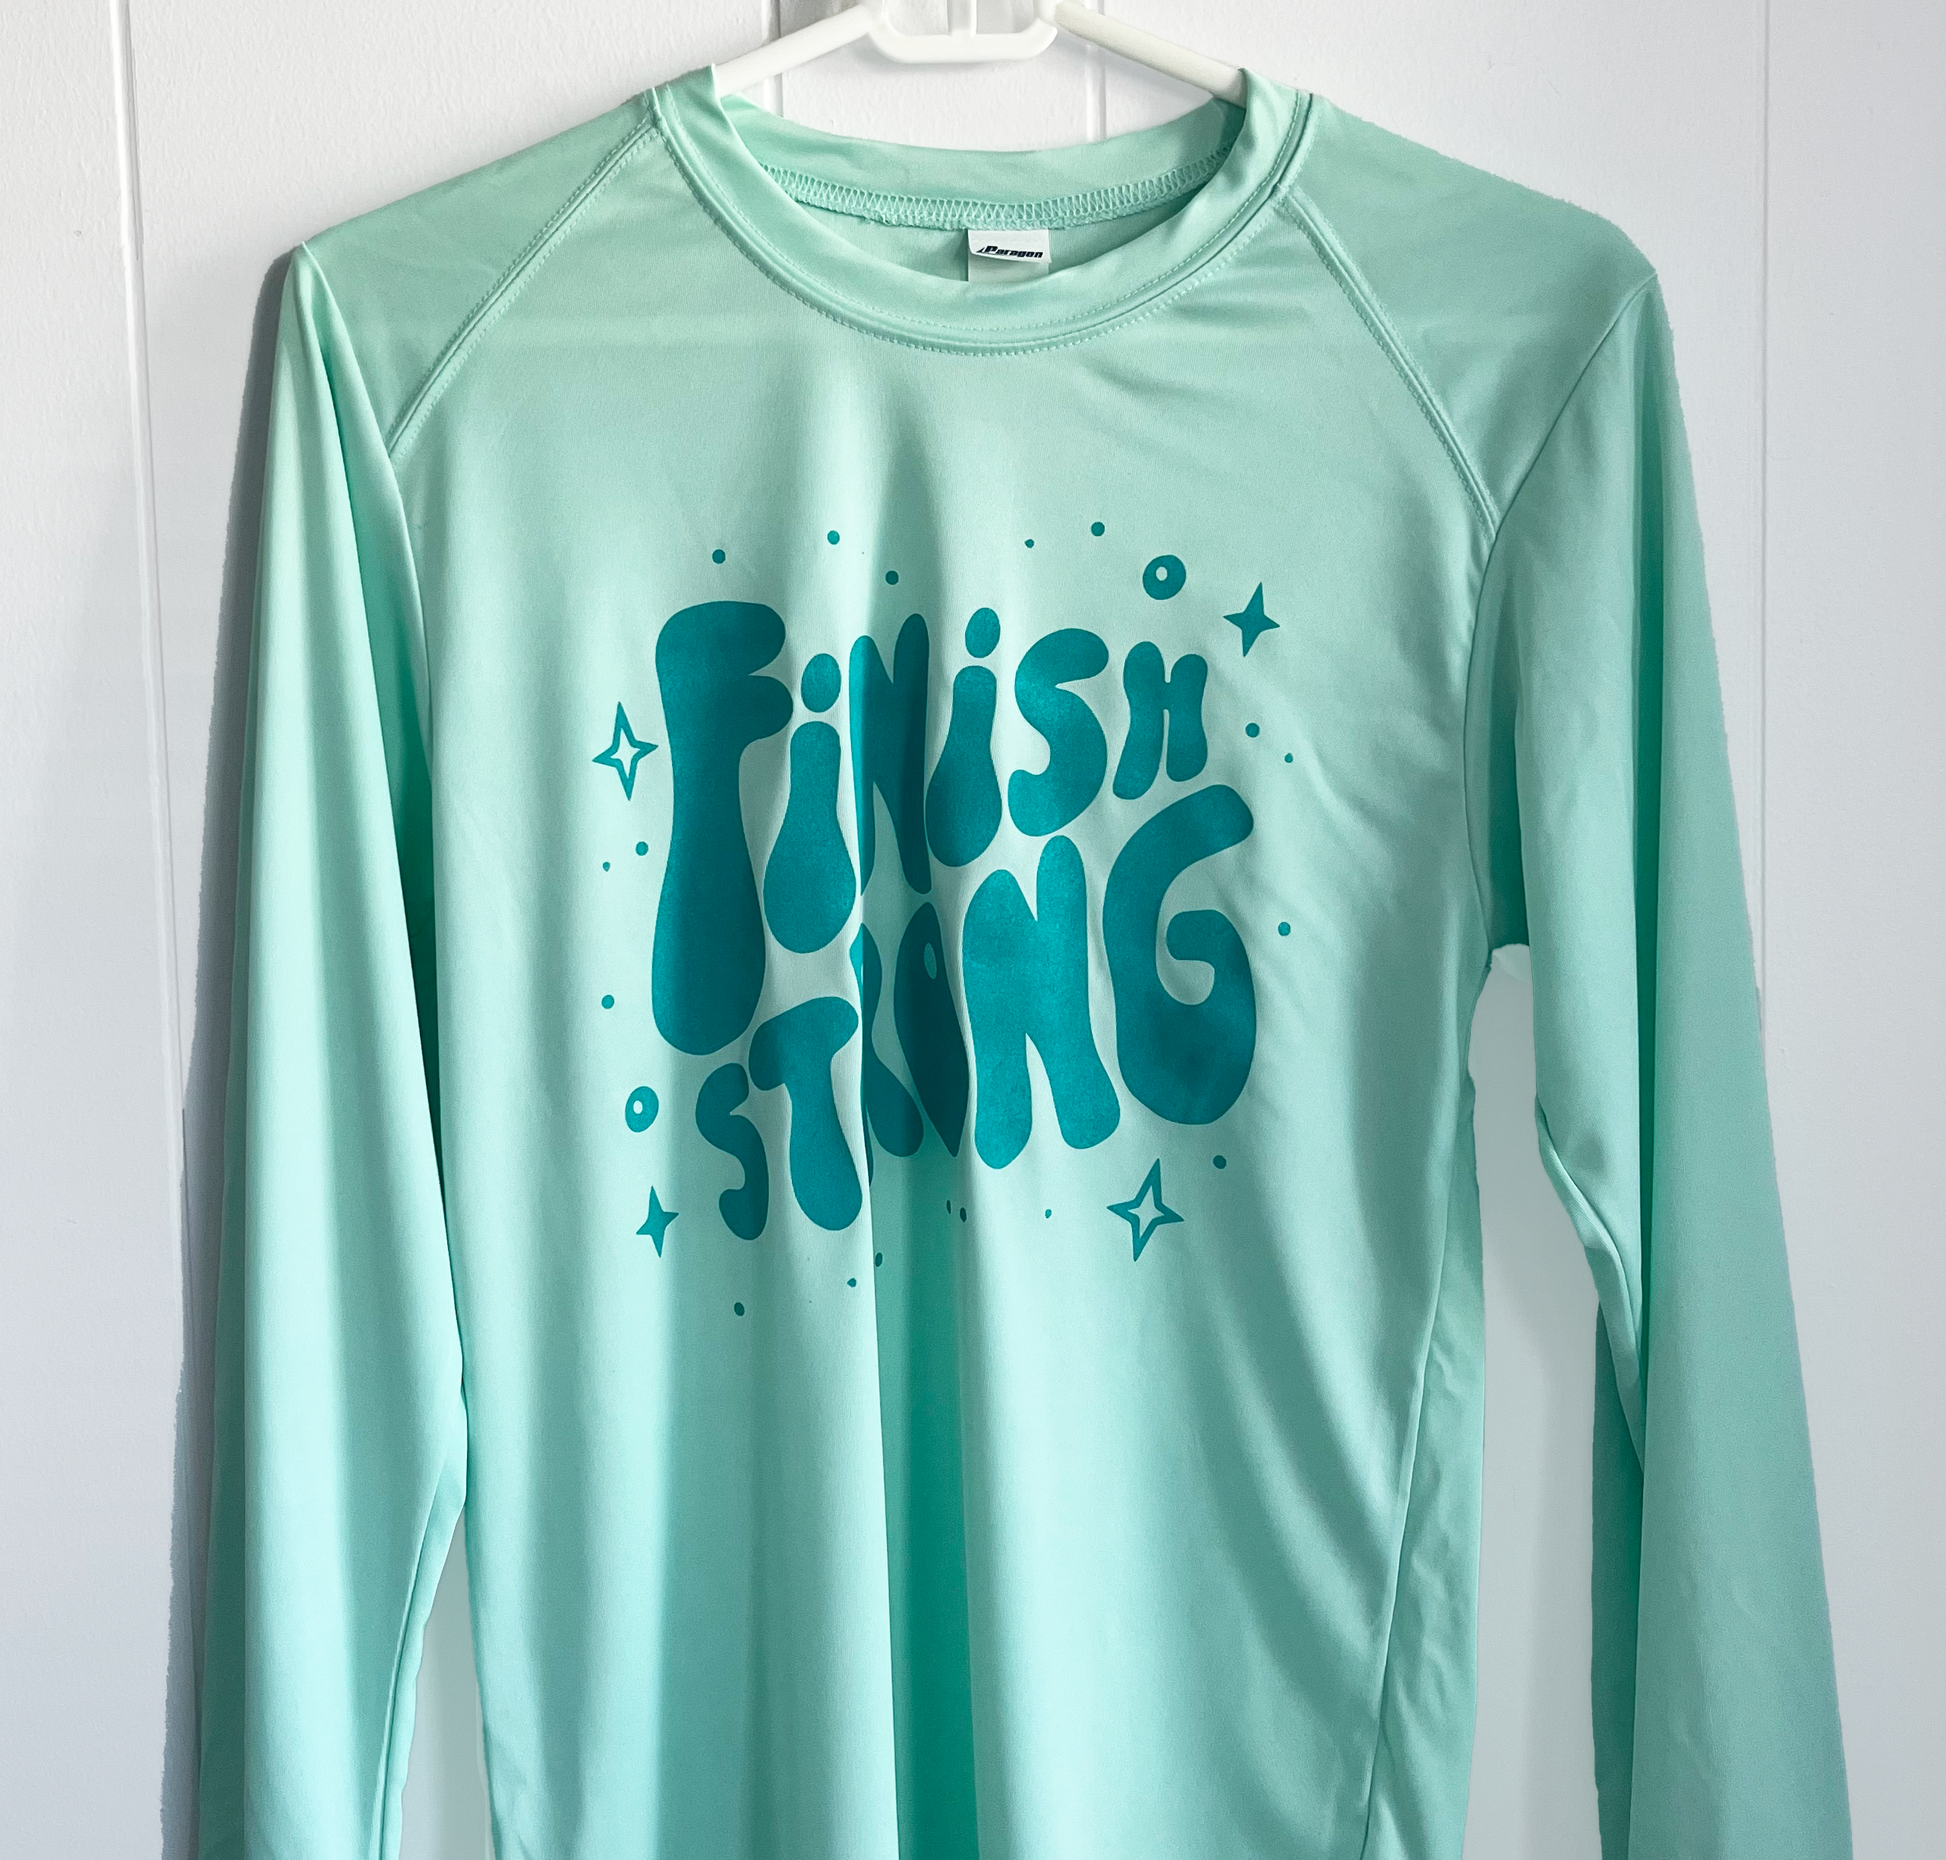 finish strong long sleeve in teal